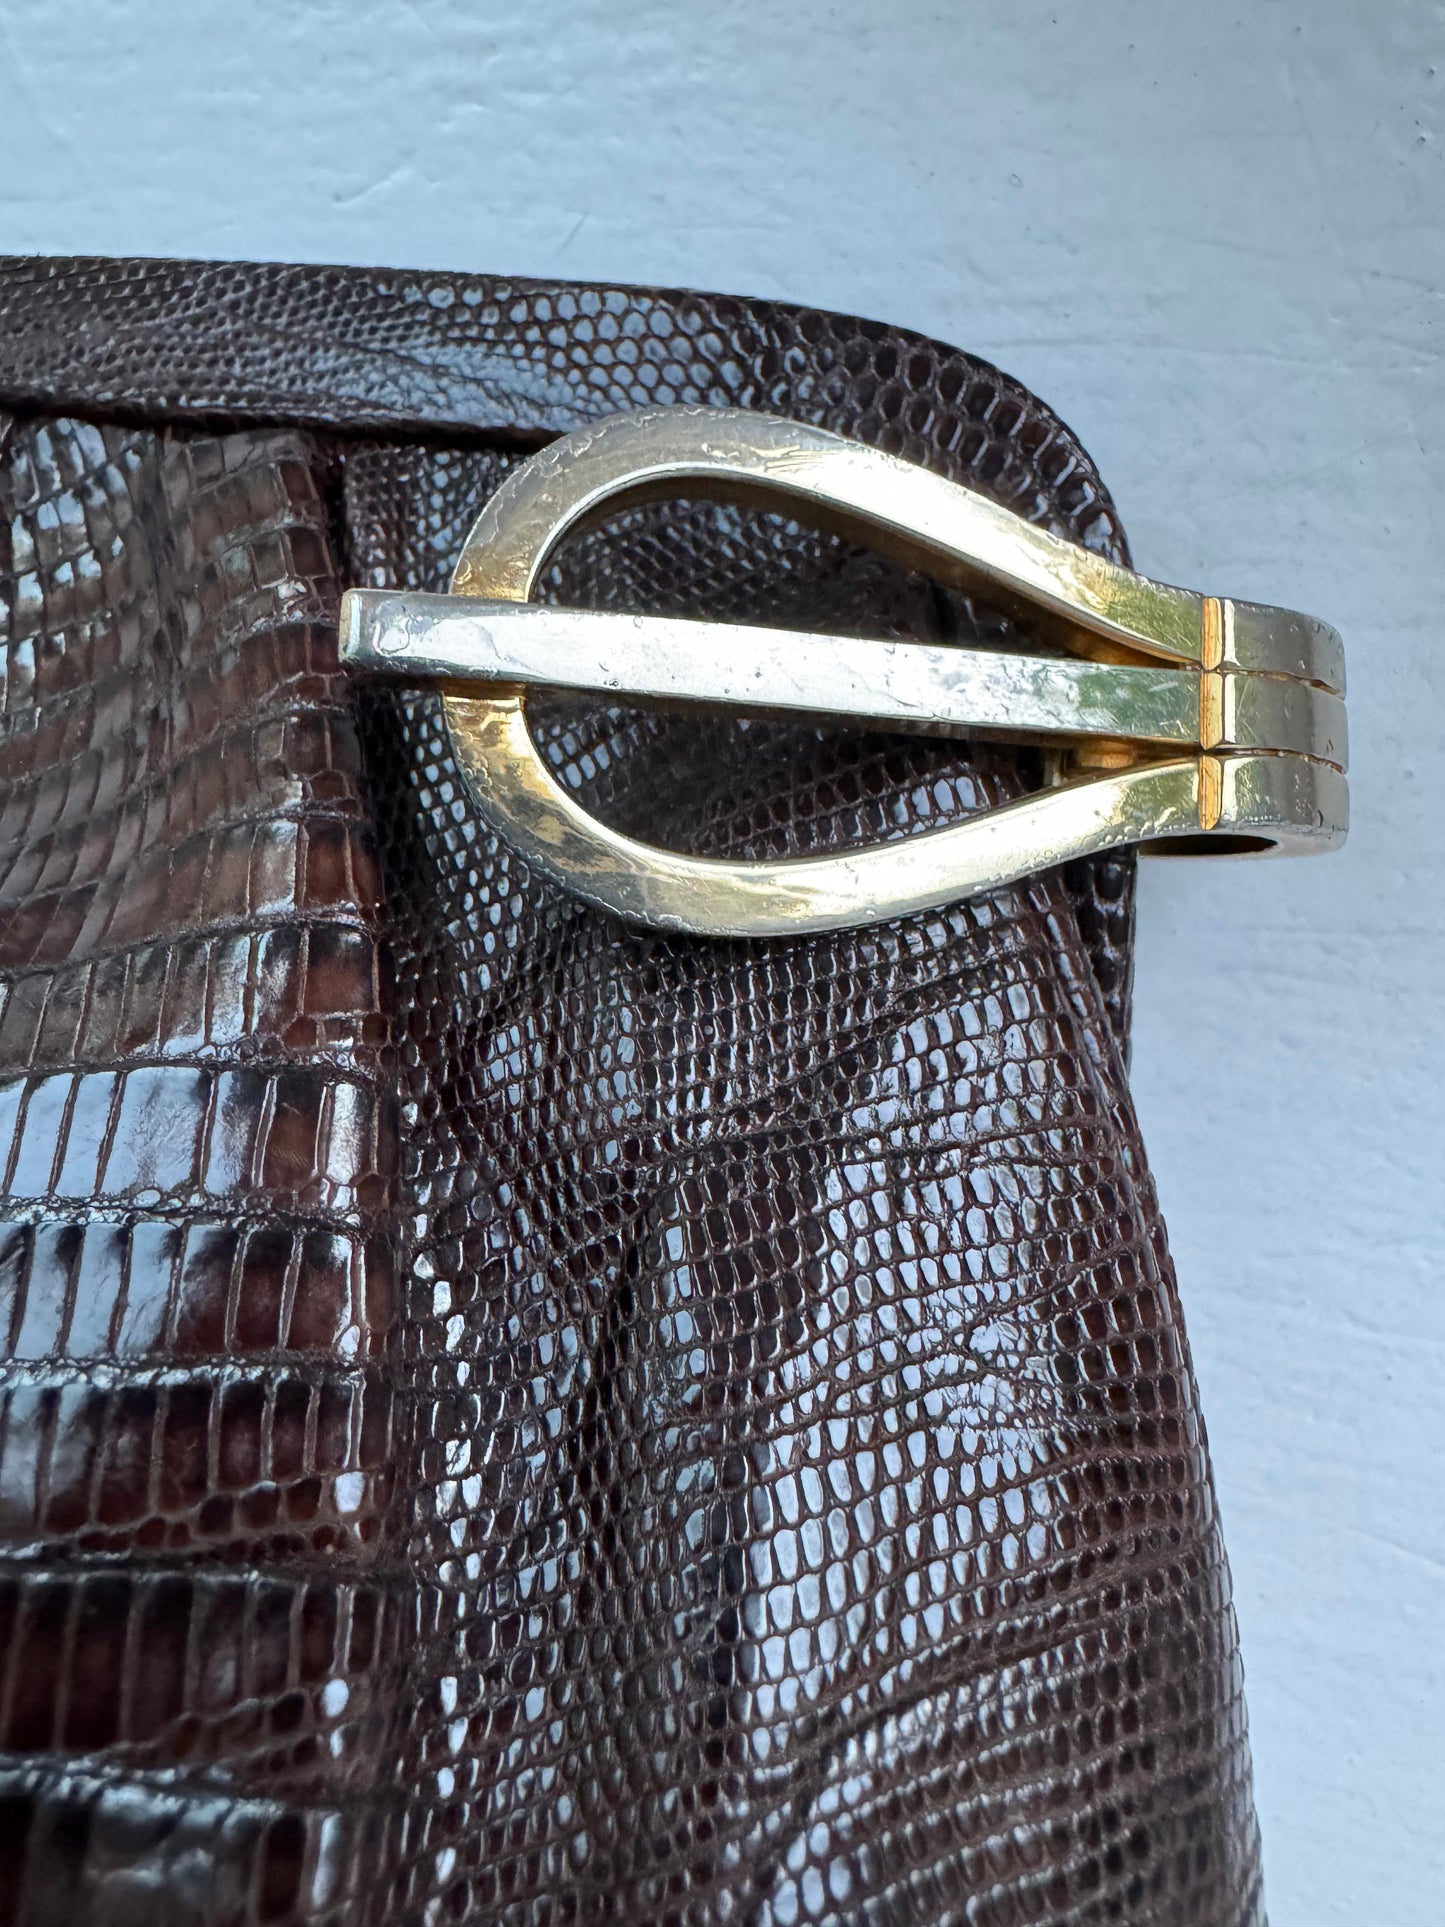 Vintage Brown Skin Clutch with stunning gold tone hardware